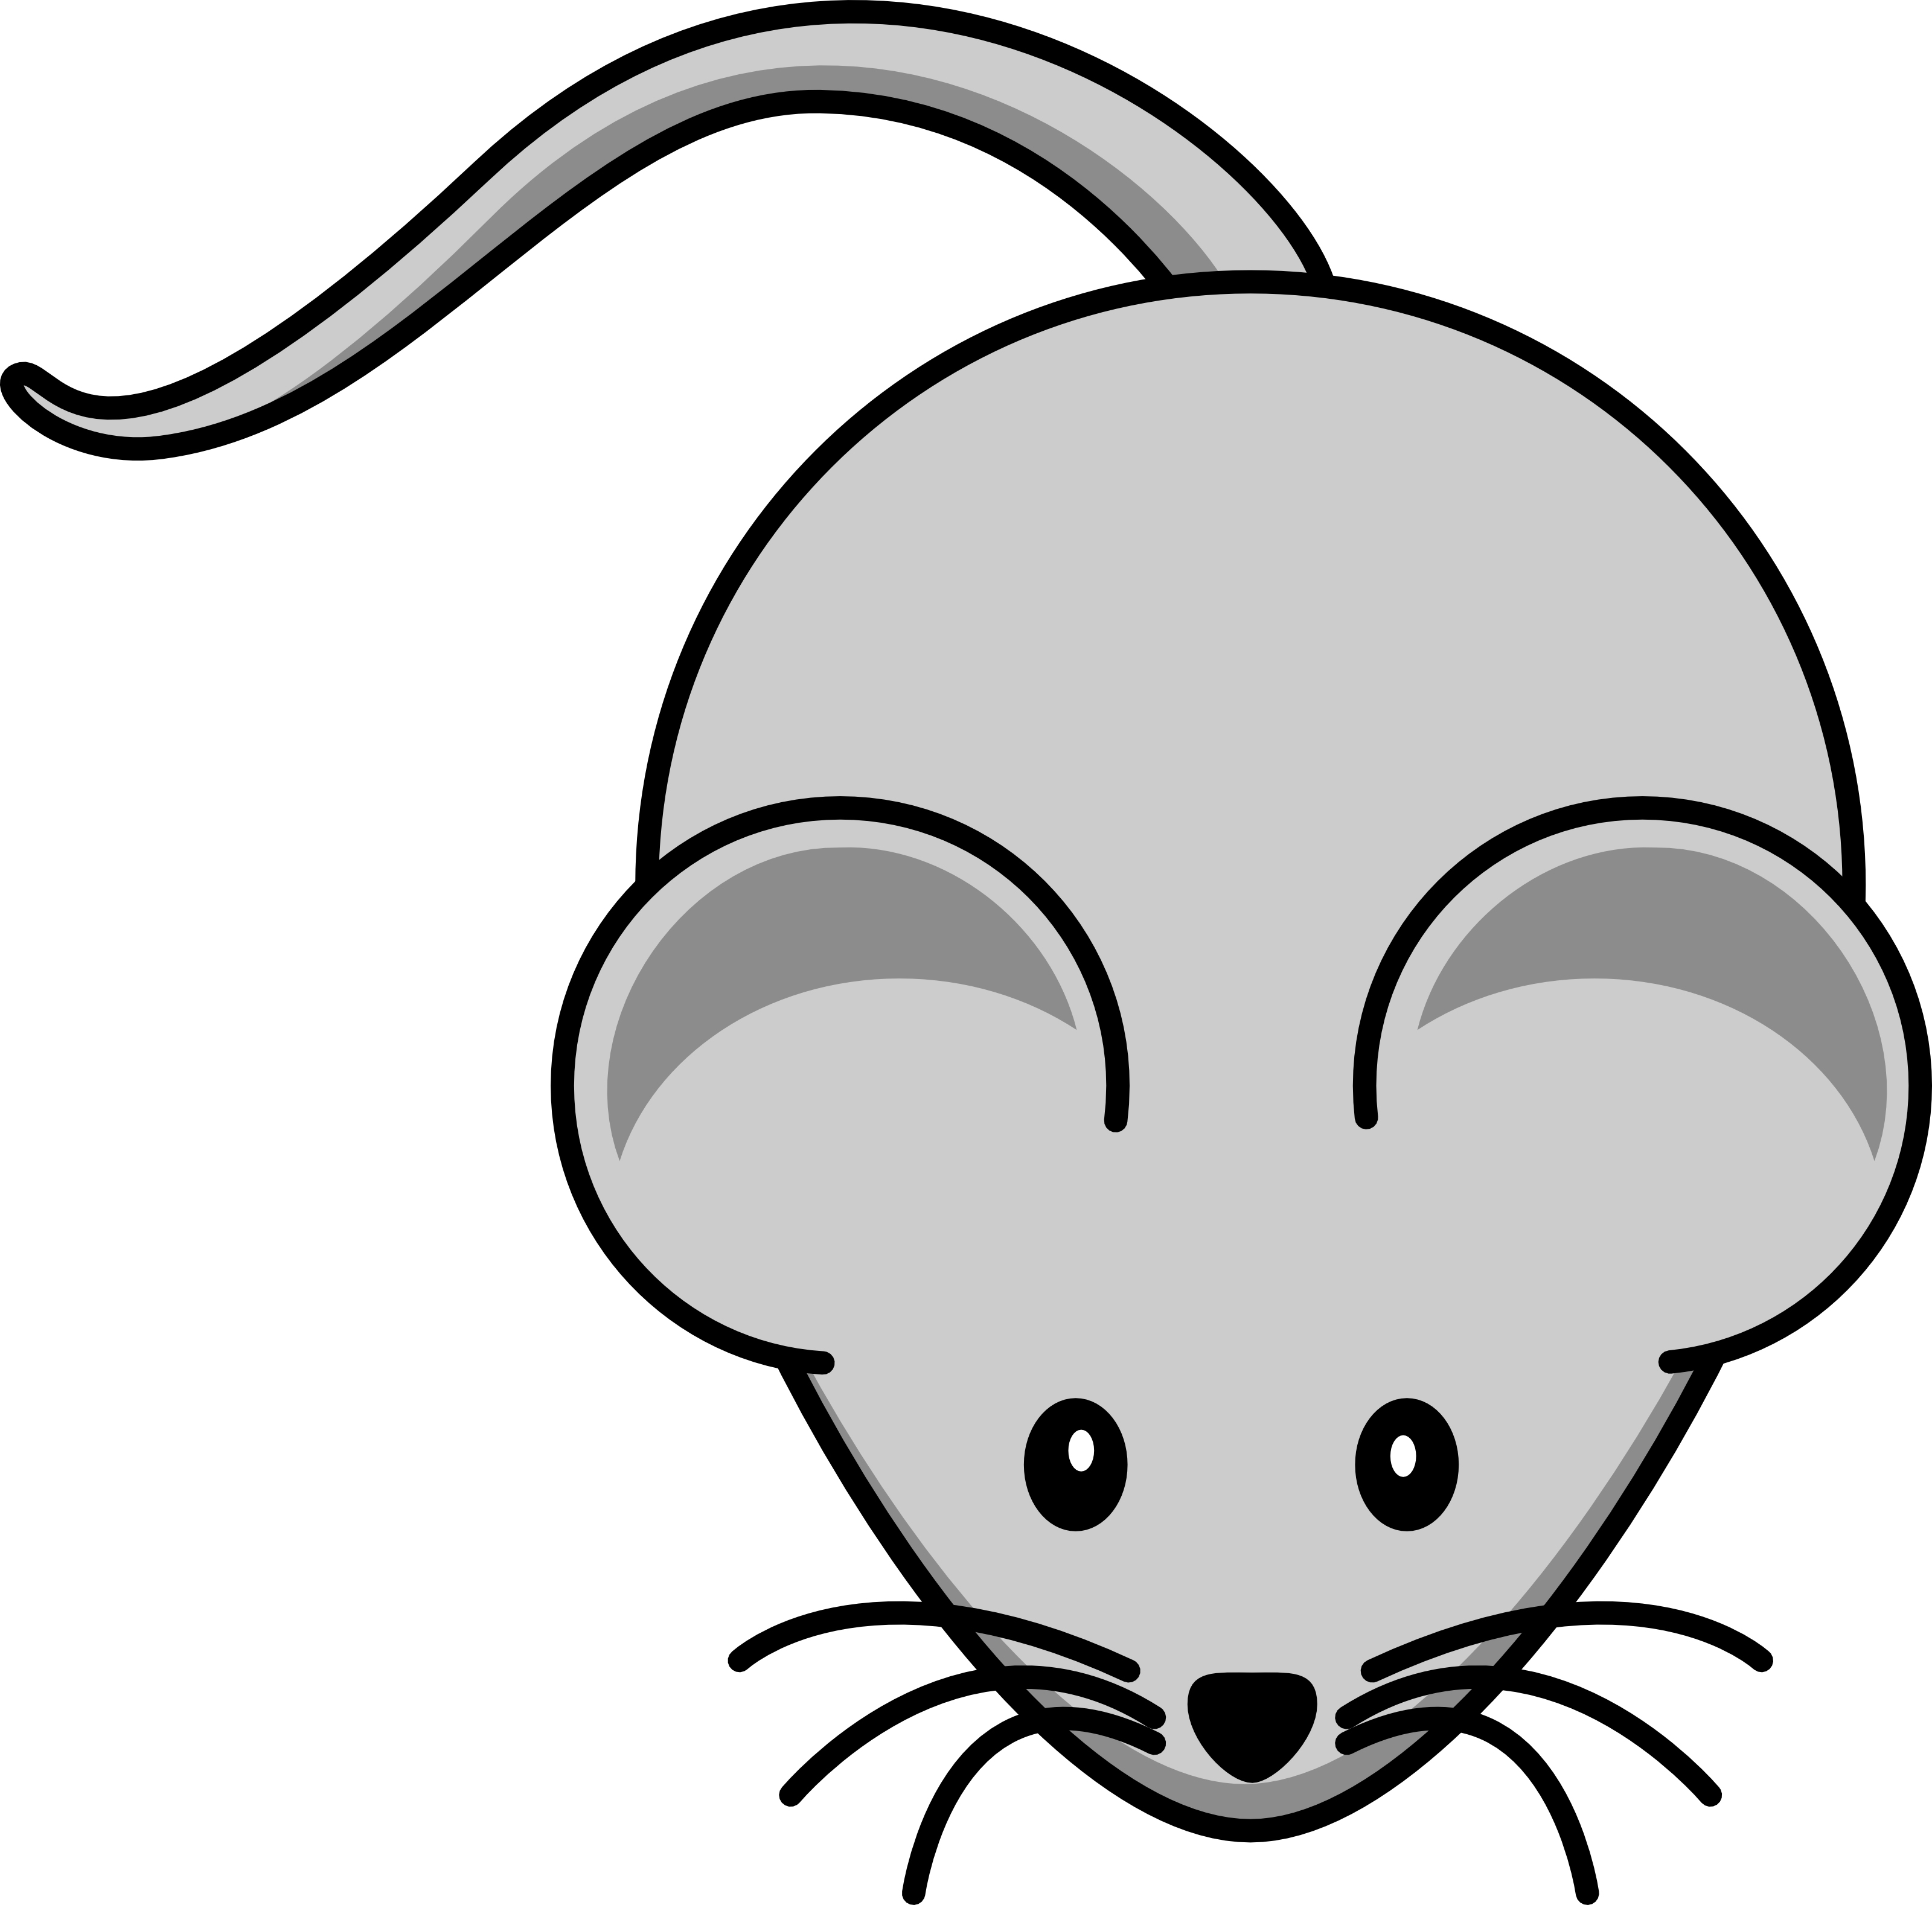 Animated computer mouse clipart